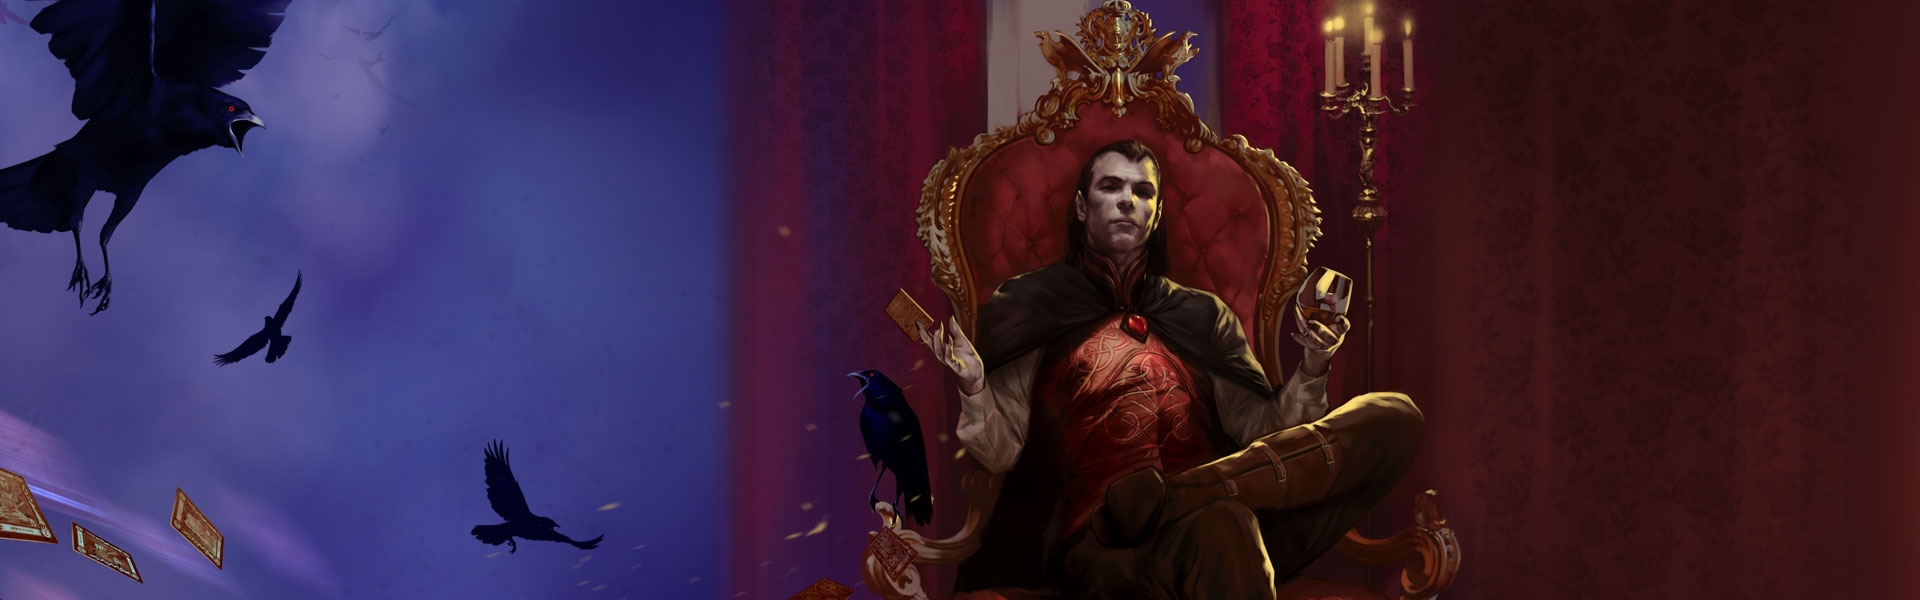 Count Strahd sitting on his throne, taken from the cover of the D&D book Curse of Strahd